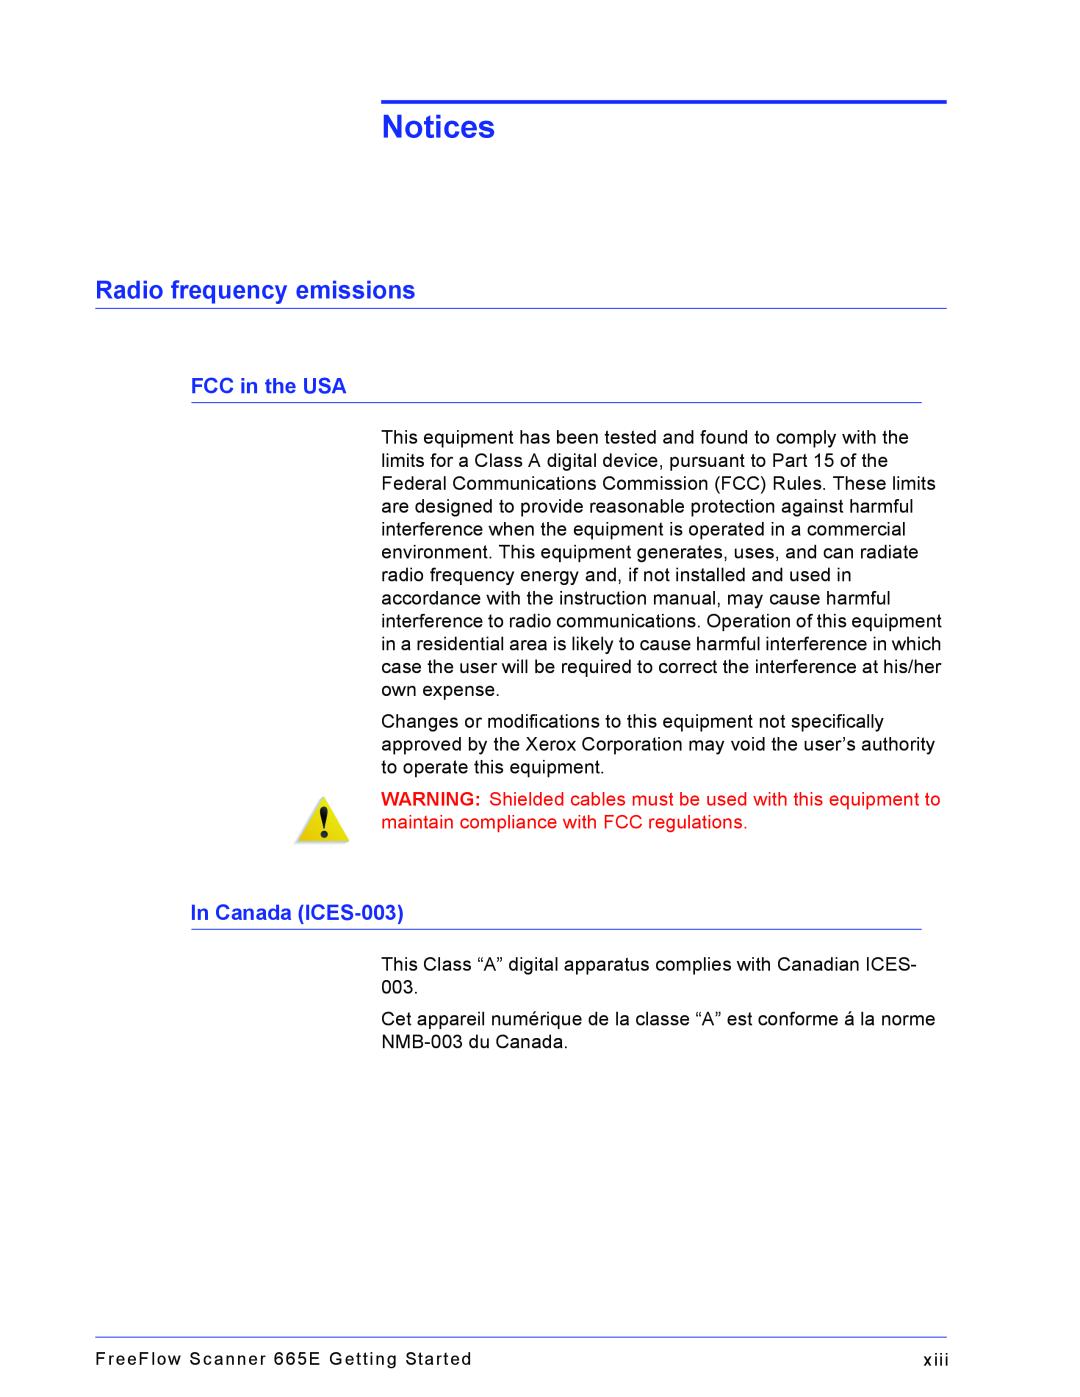 Xerox 665E manual Notices, Radio frequency emissions, FCC in the USA, In Canada ICES-003 